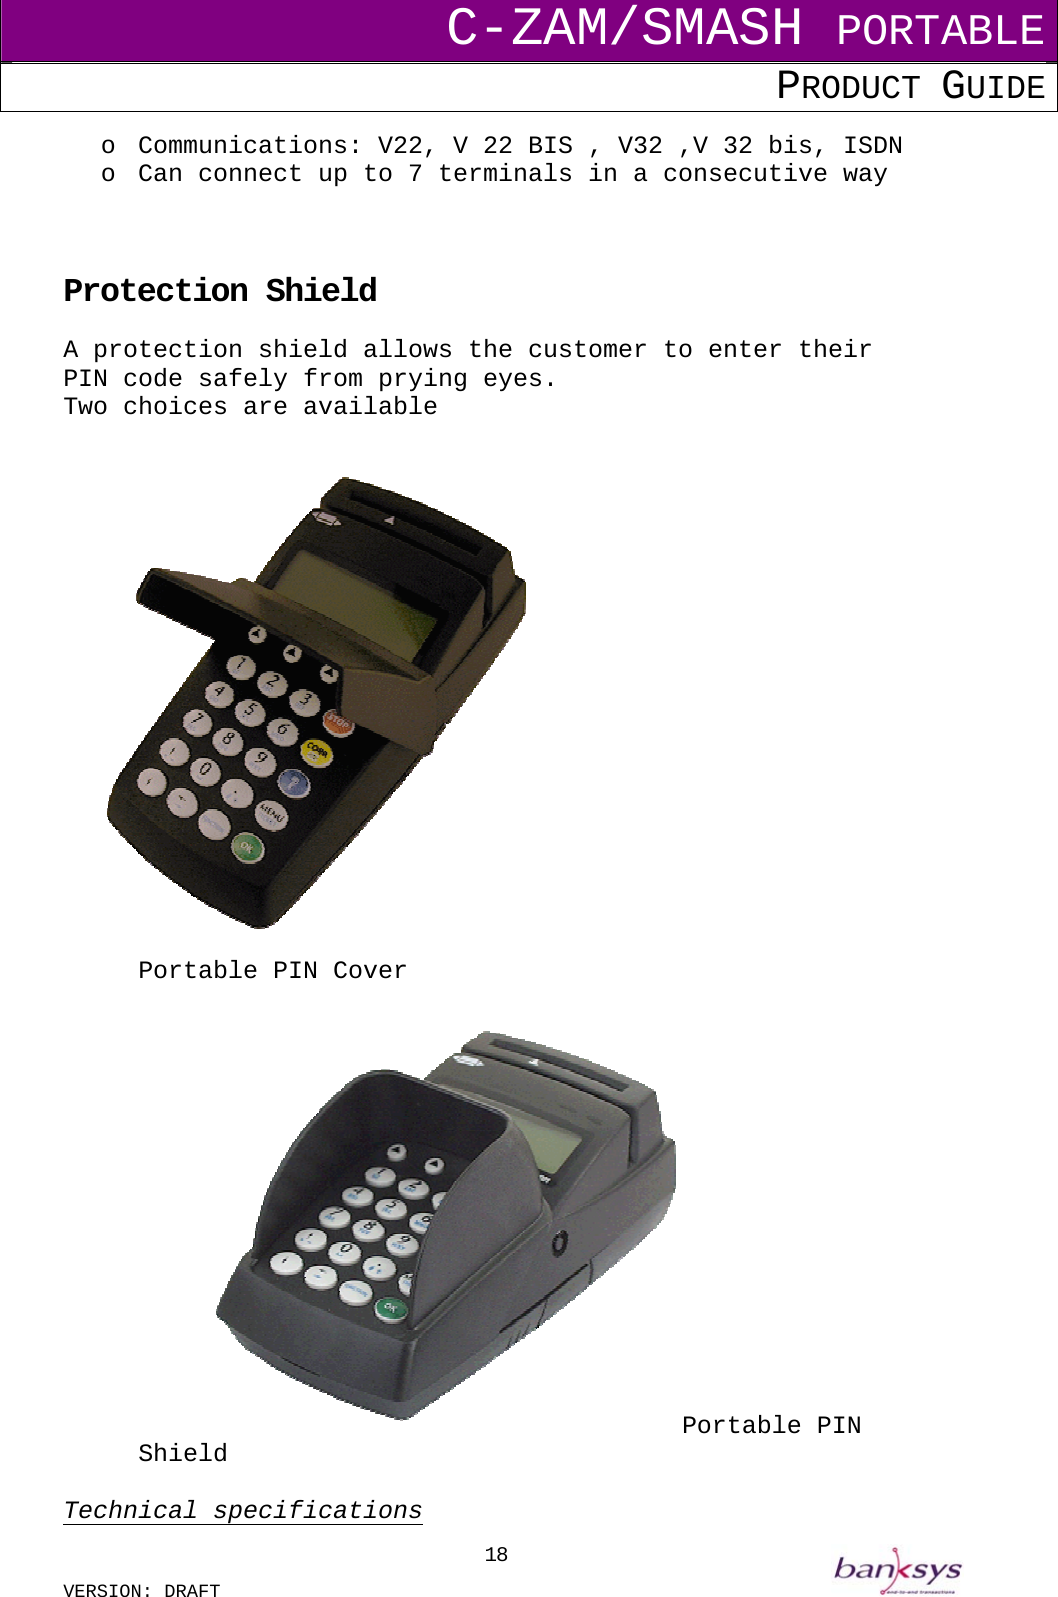 C-ZAM/SMASH PORTABLE PRODUCT GUIDE  VERSION: DRAFT     18o  Communications: V22, V 22 BIS , V32 ,V 32 bis, ISDN o  Can connect up to 7 terminals in a consecutive way    Protection Shield A protection shield allows the customer to enter their PIN code safely from prying eyes. Two choices are available             Portable PIN Cover  Portable PIN Shield  Technical specifications 